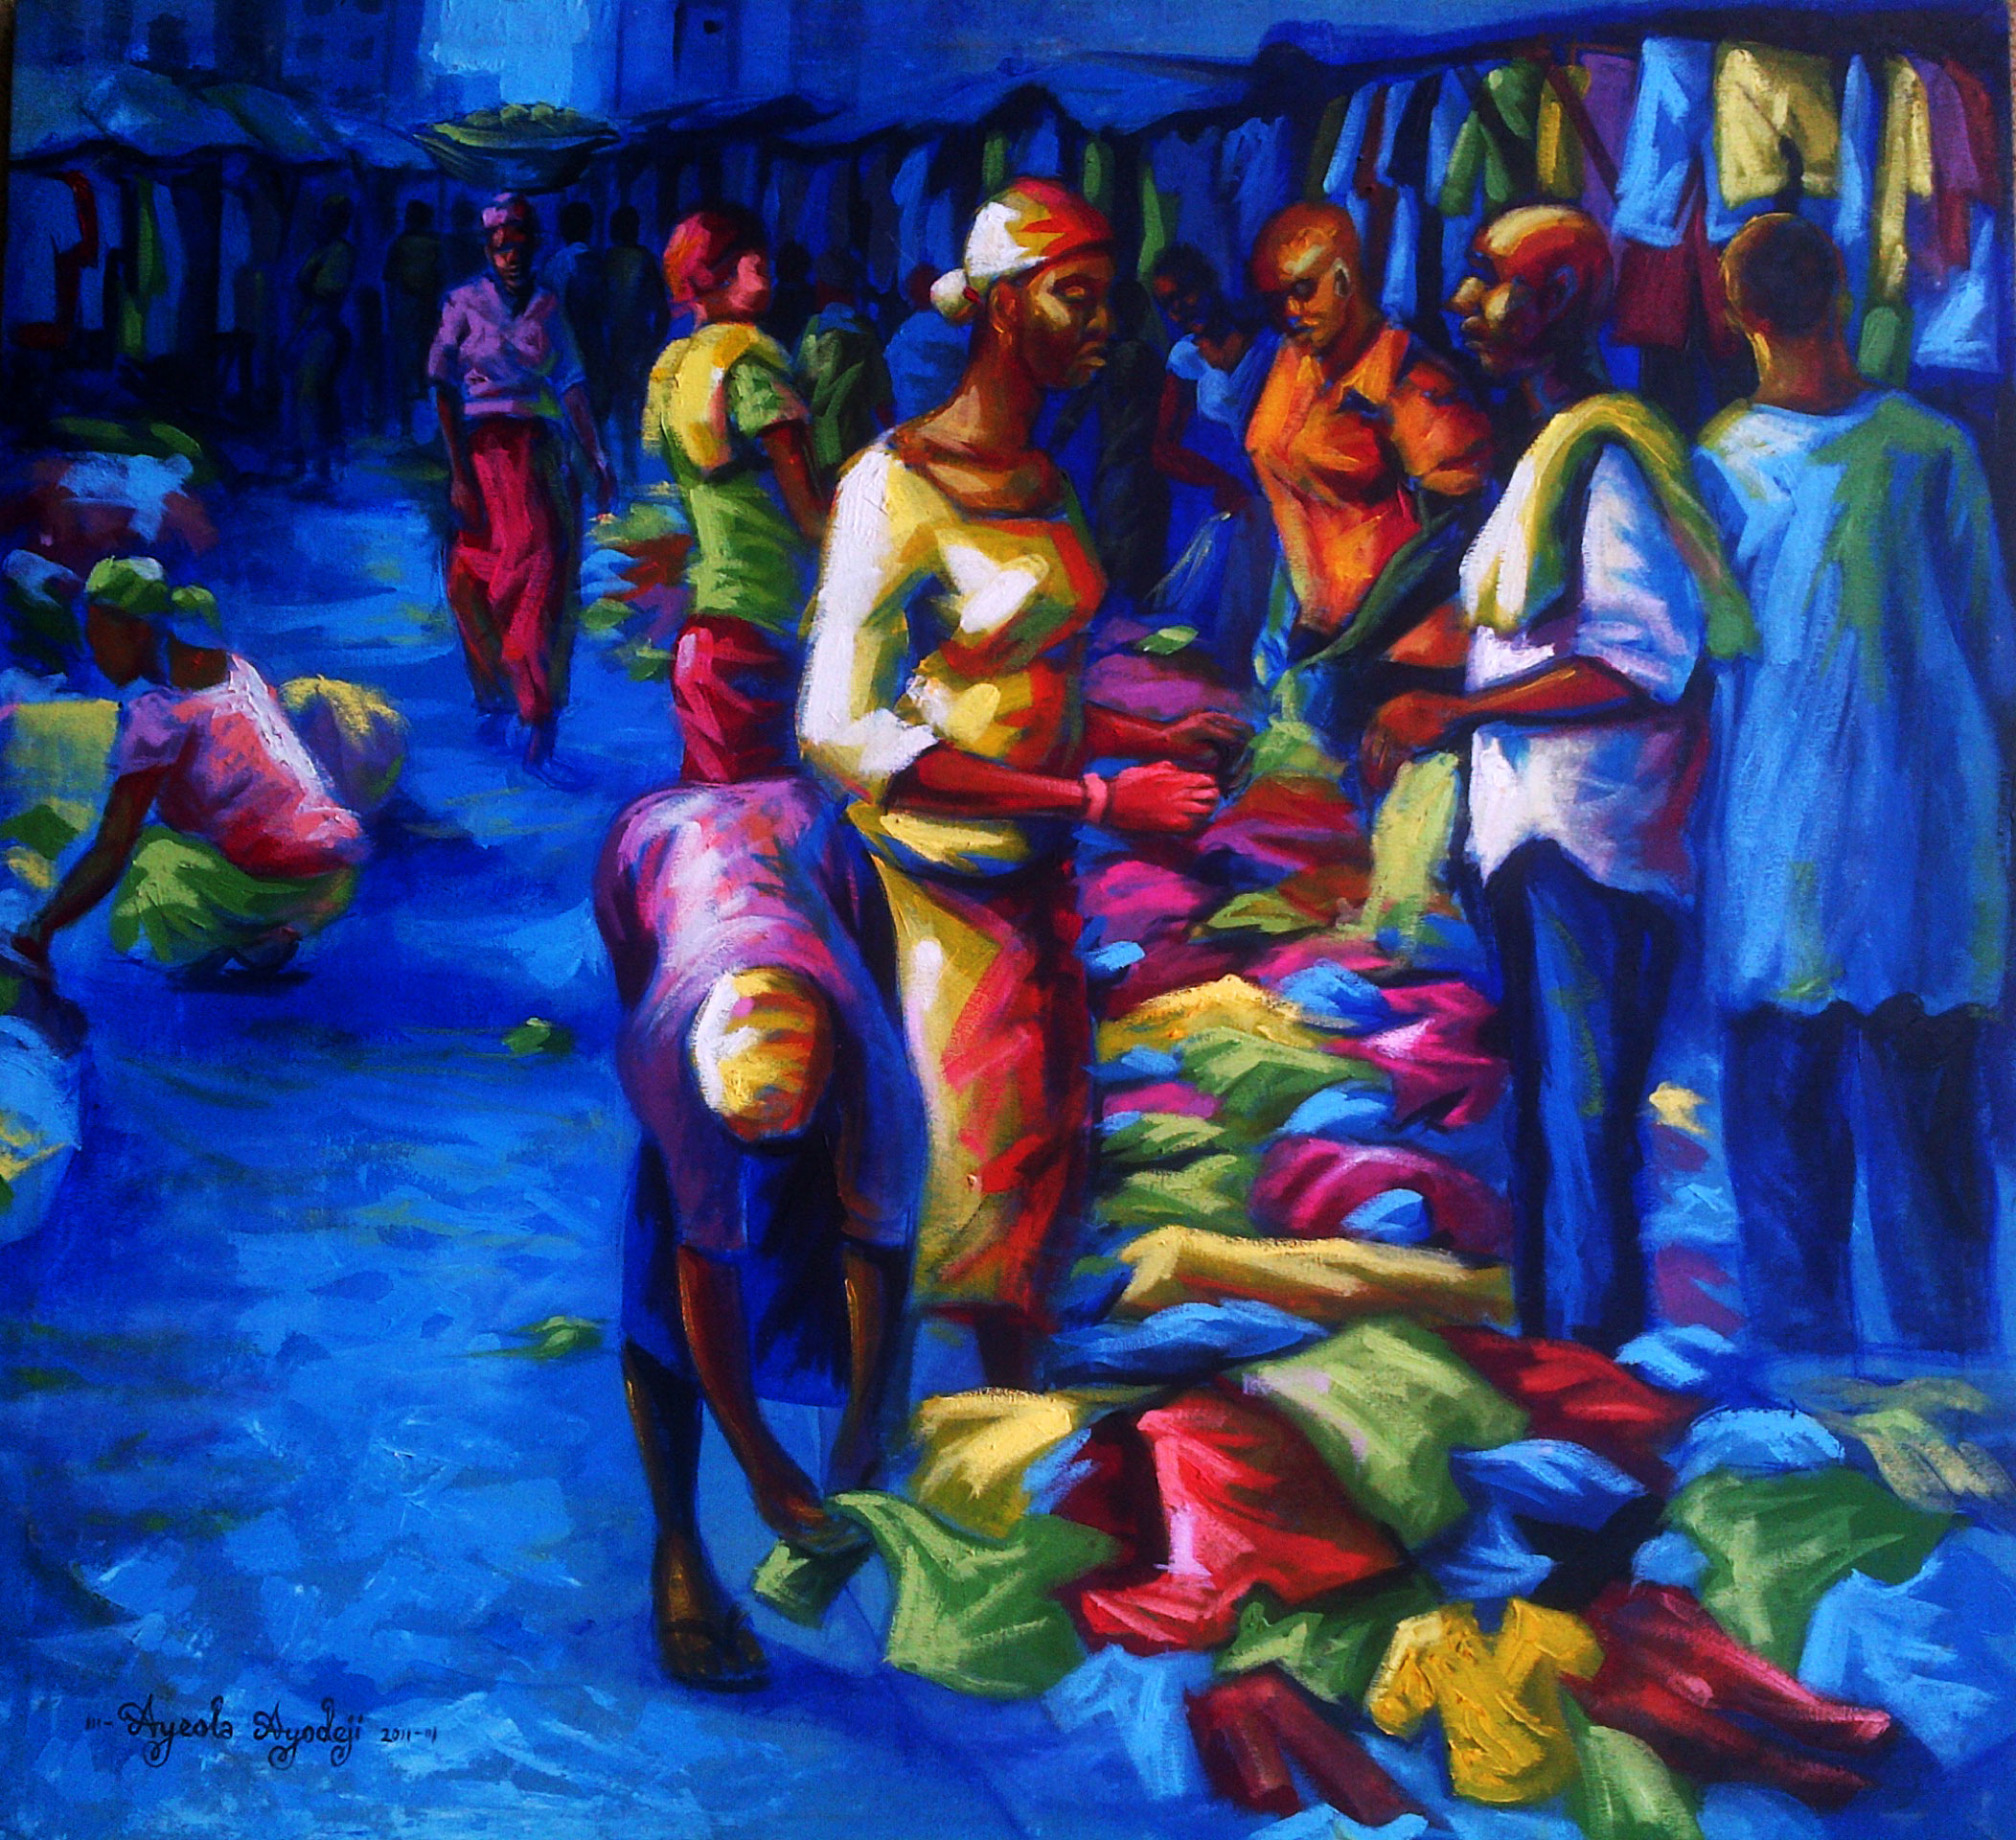 Bend down boutique painting by Ayeola Ayodeji